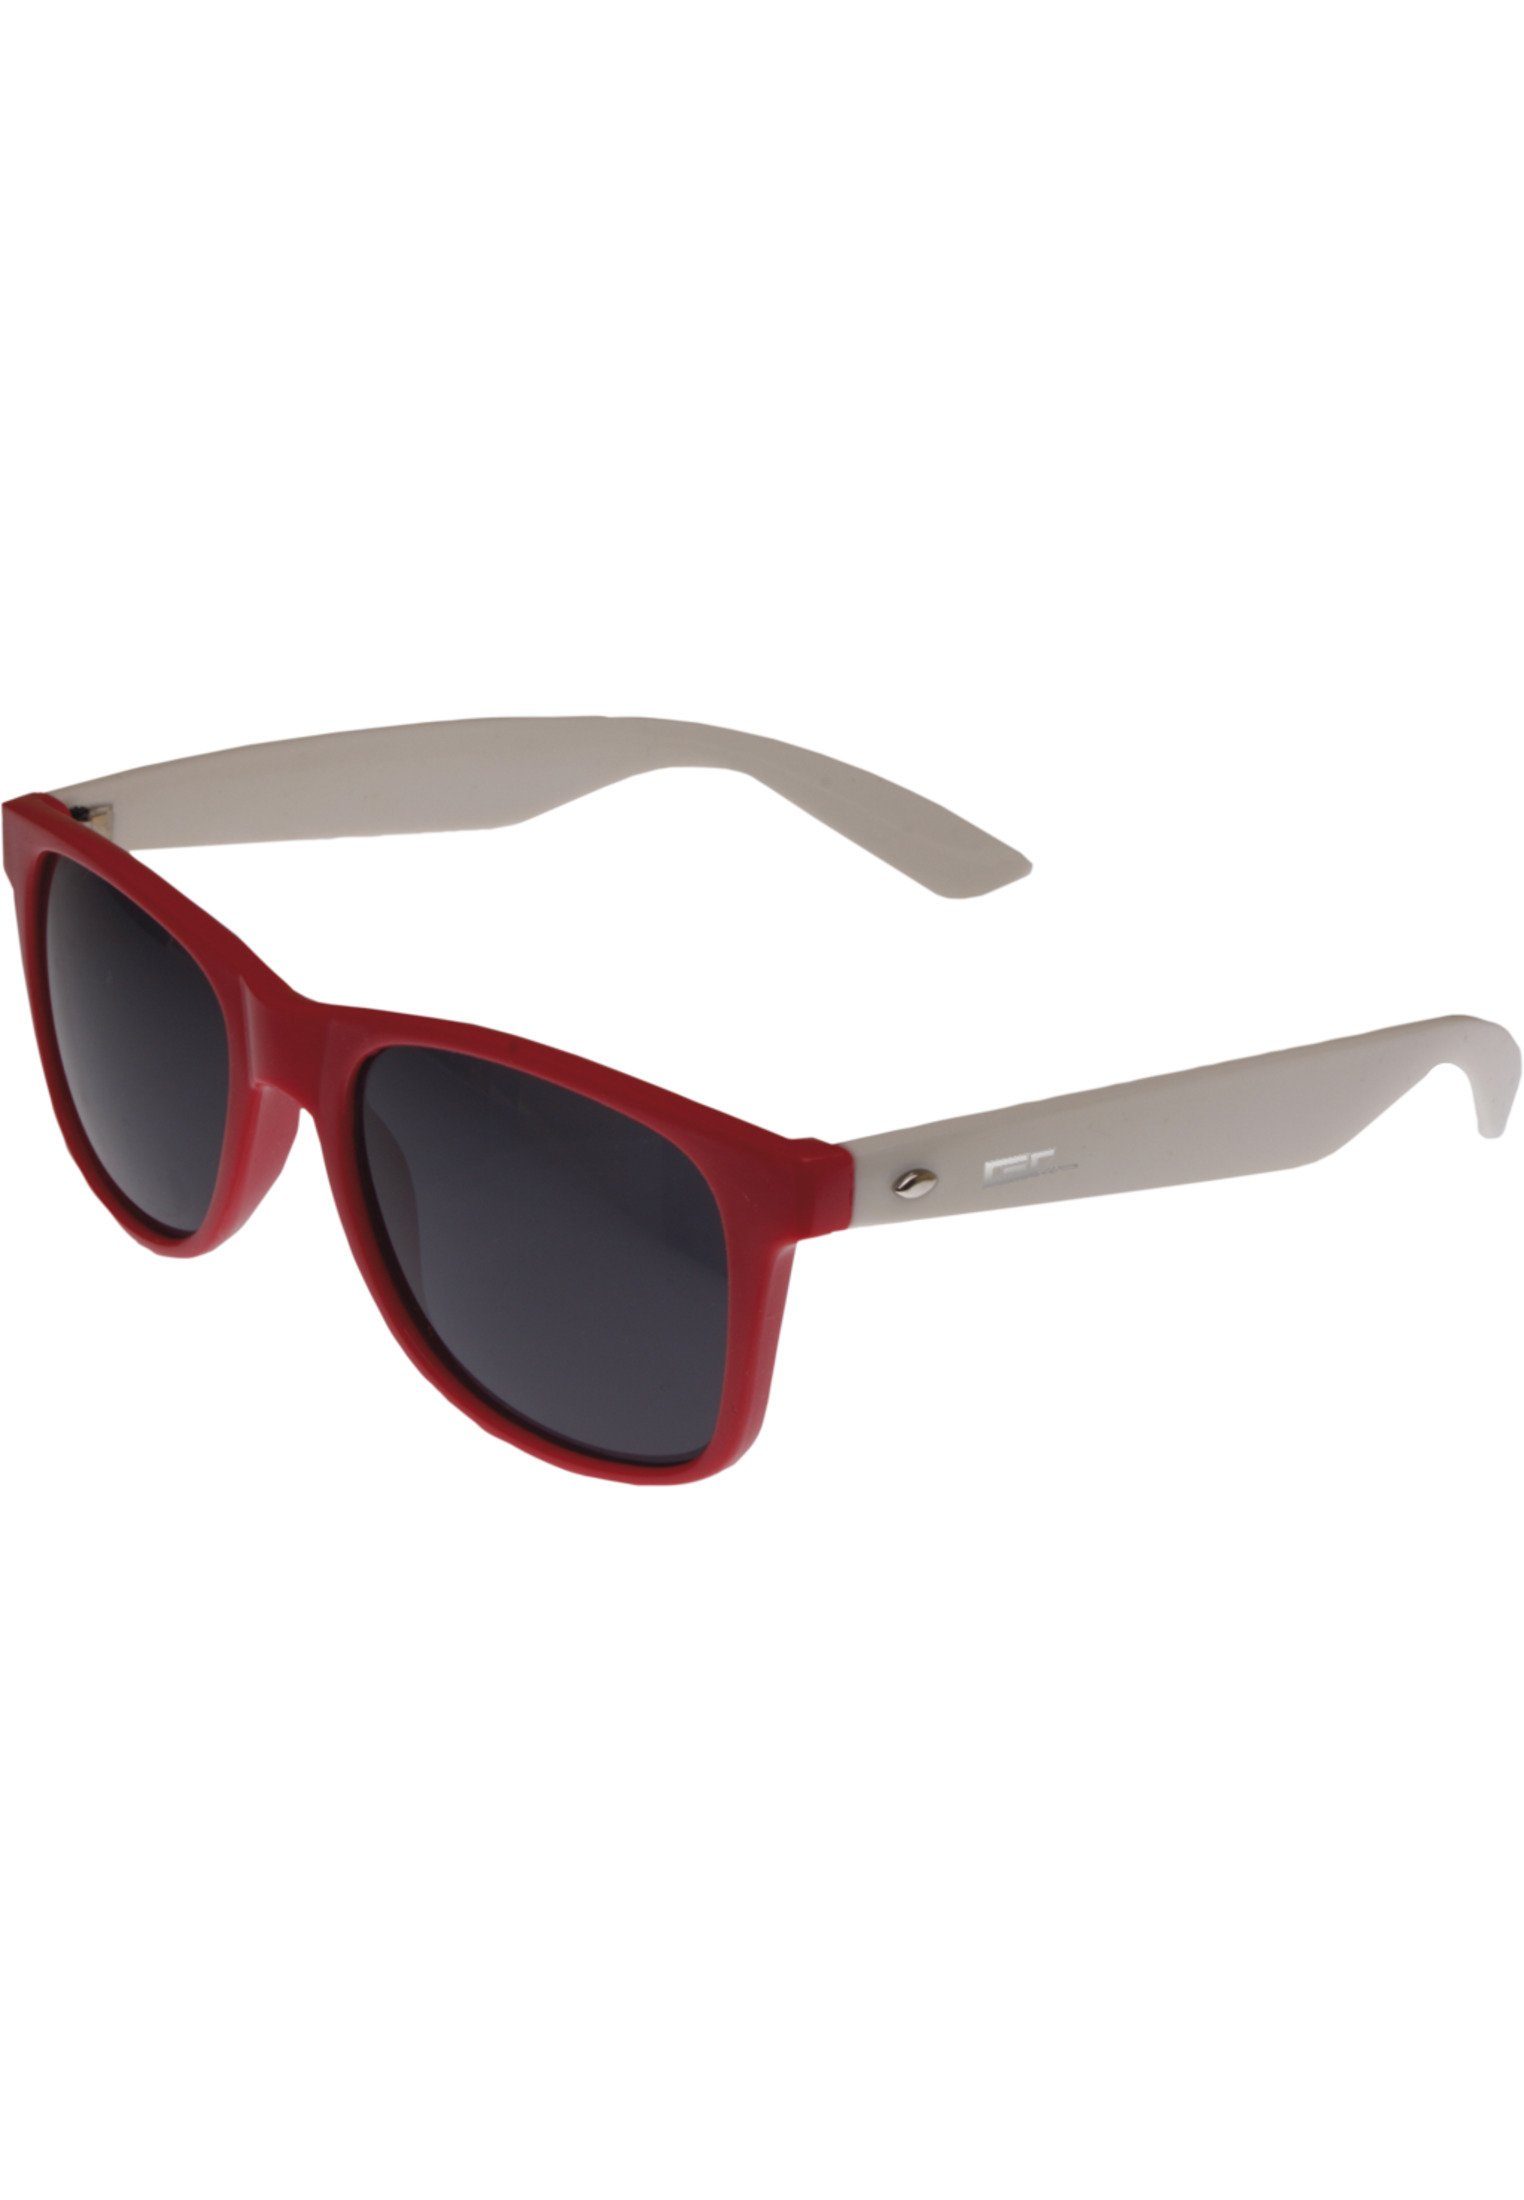 MSTRDS Sonnenbrille Groove Accessoires red/white GStwo Shades